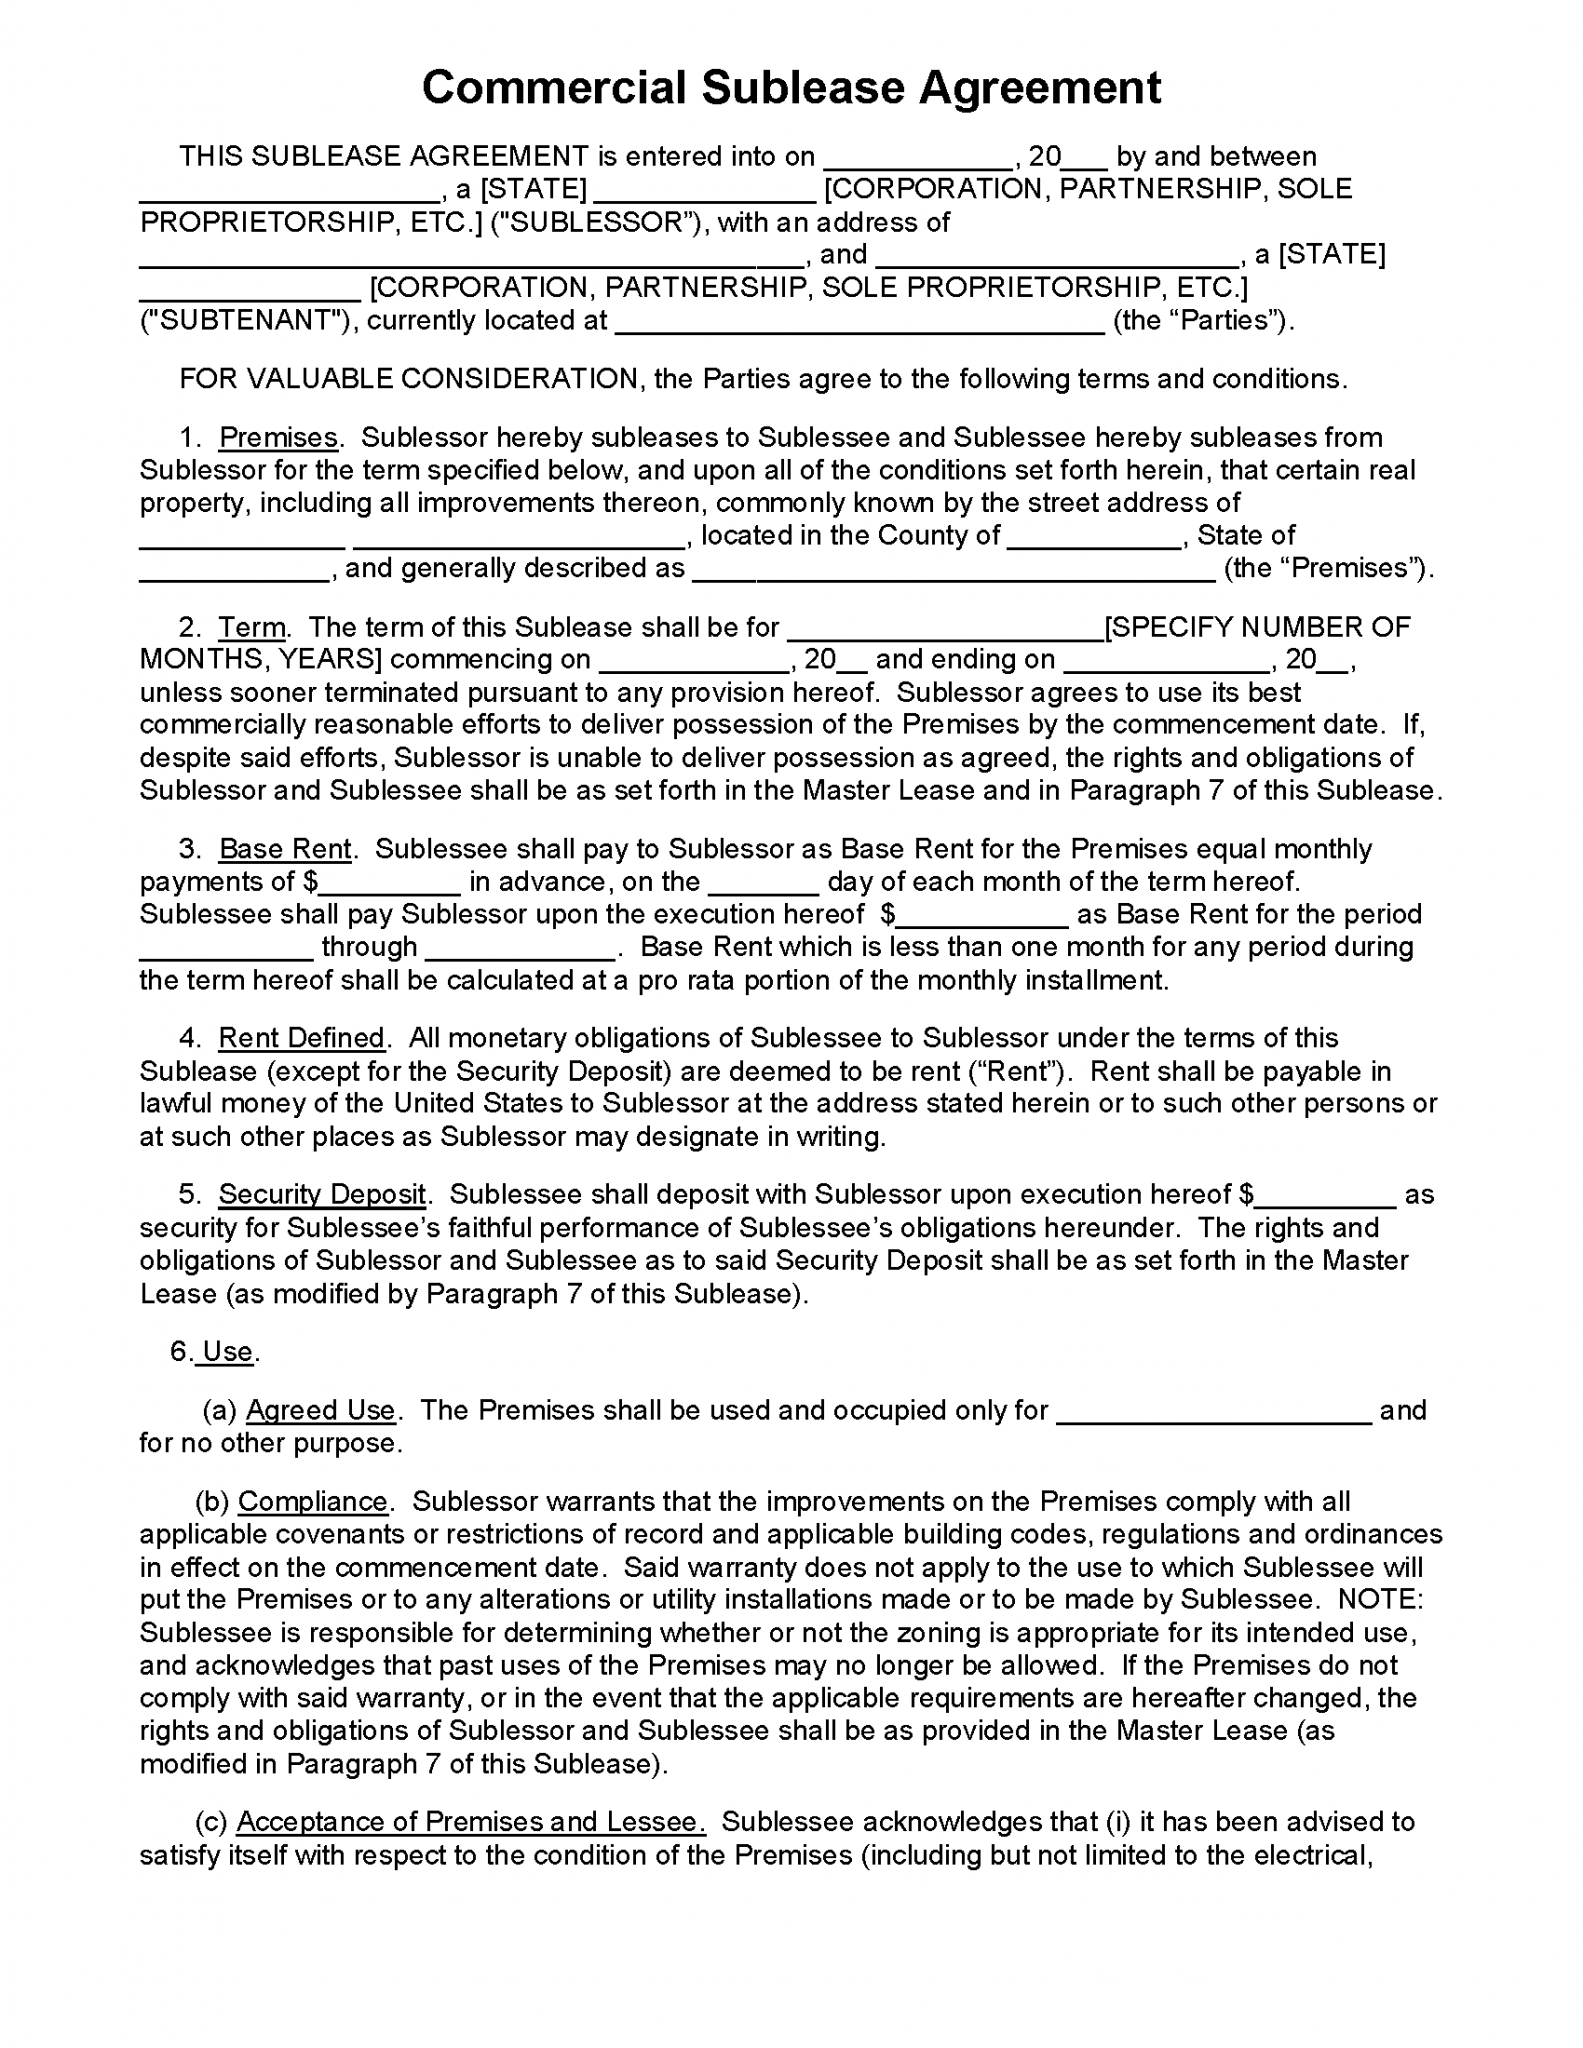 Commercial Sublease Agreement Template Free Sample Example Format